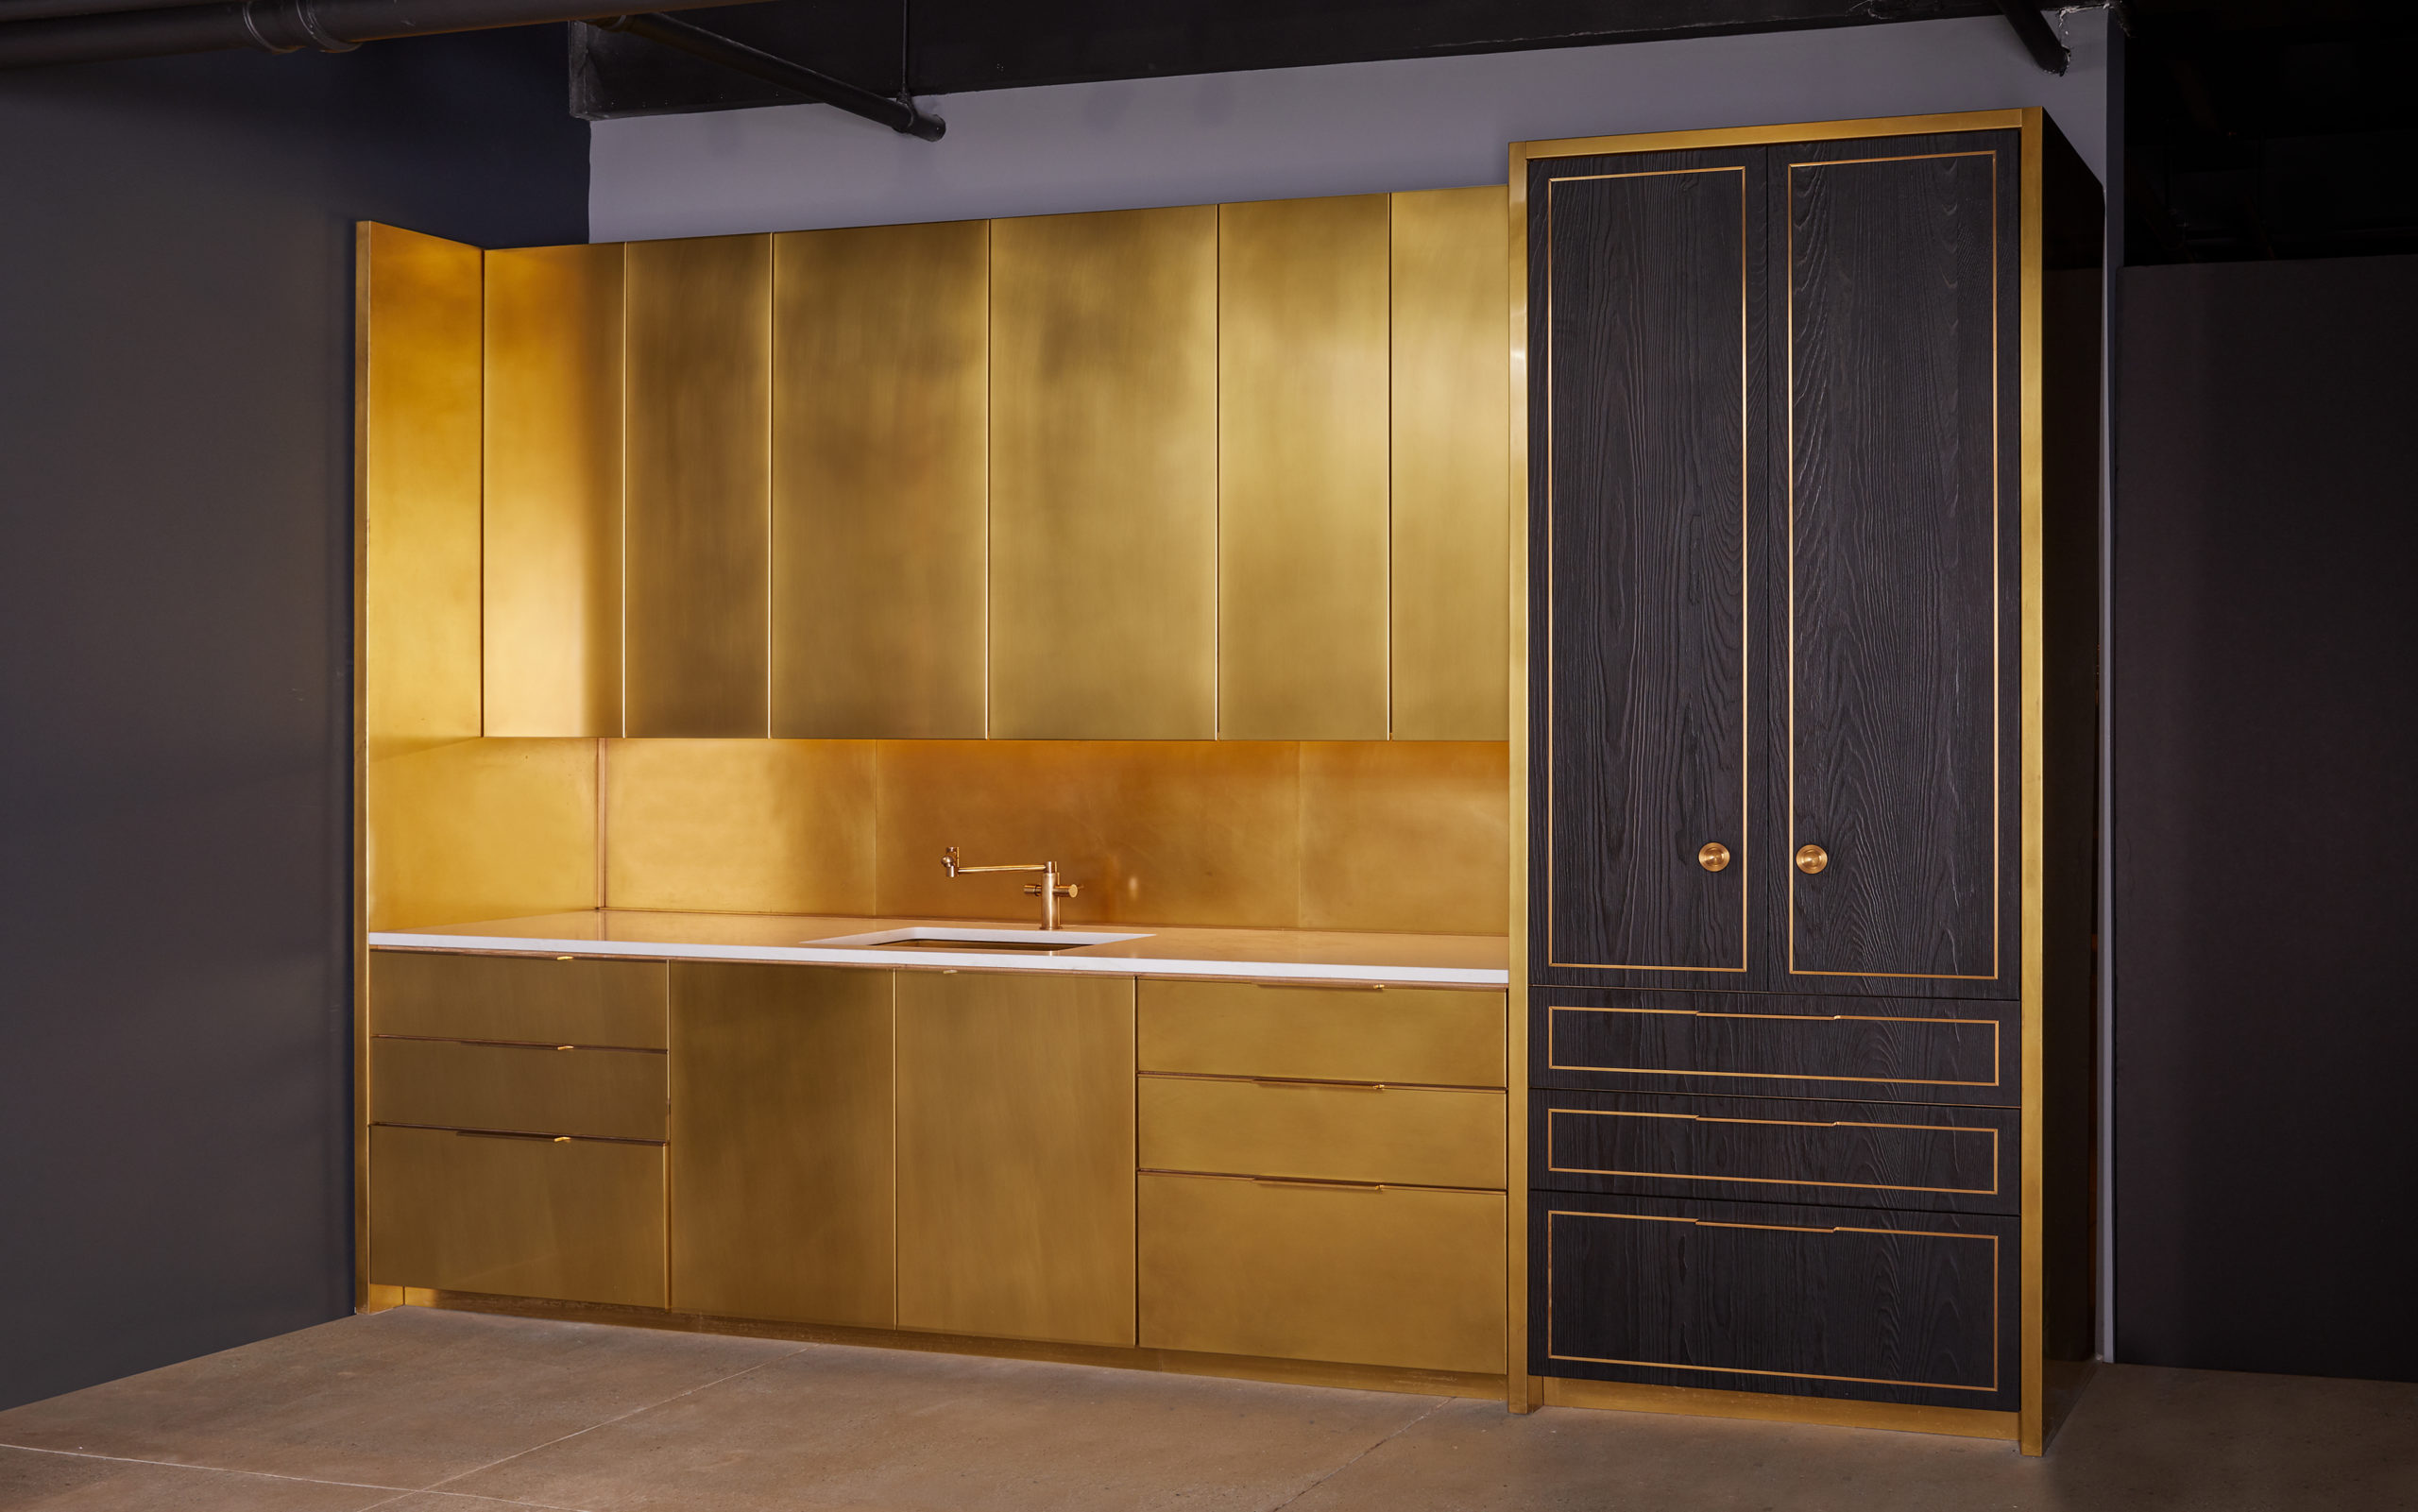 amuneal_products_WNWN_NYDC_5Brass-Kitchen-Char-Pantry-amuneal_nycshowroom_sept19_4455-scaled-1